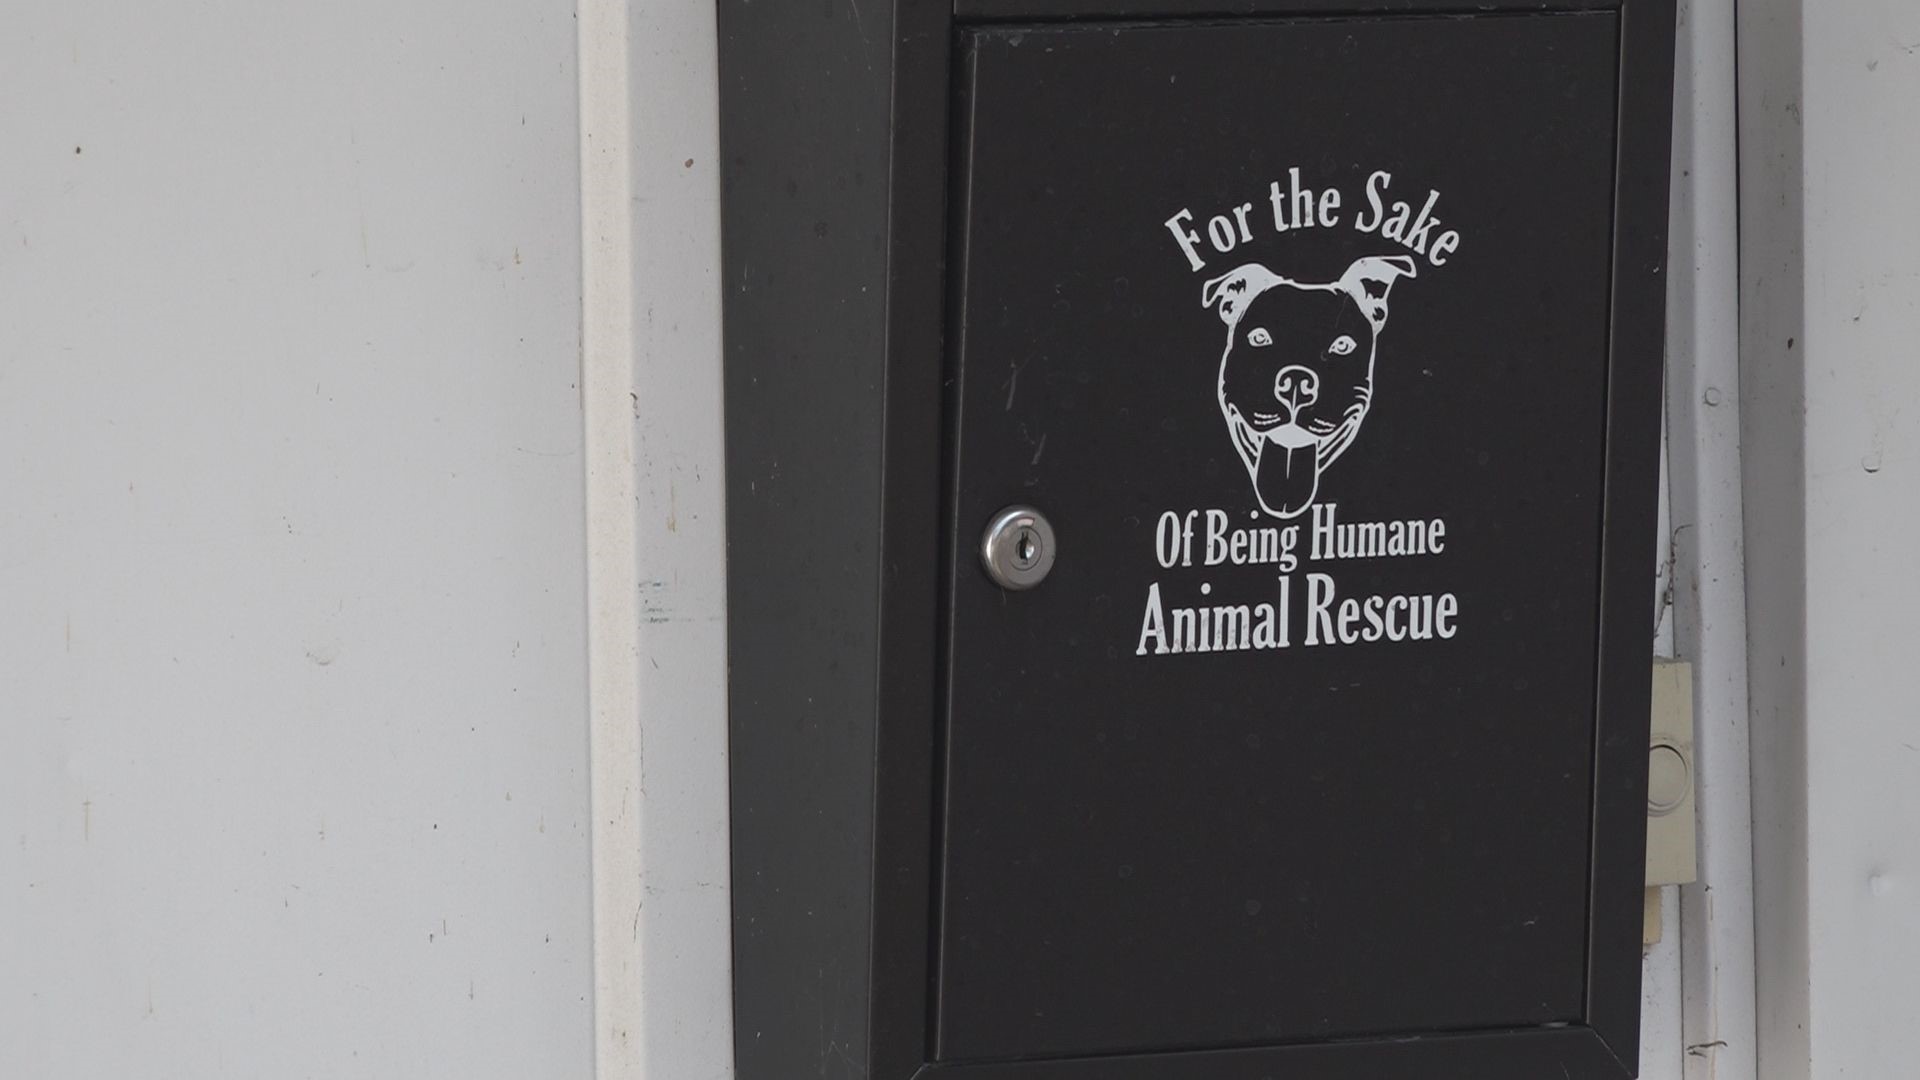 For the Sake of Being Humane Animal Rescue in Fennville needs to raise $17,500 by March 31st to remain open.